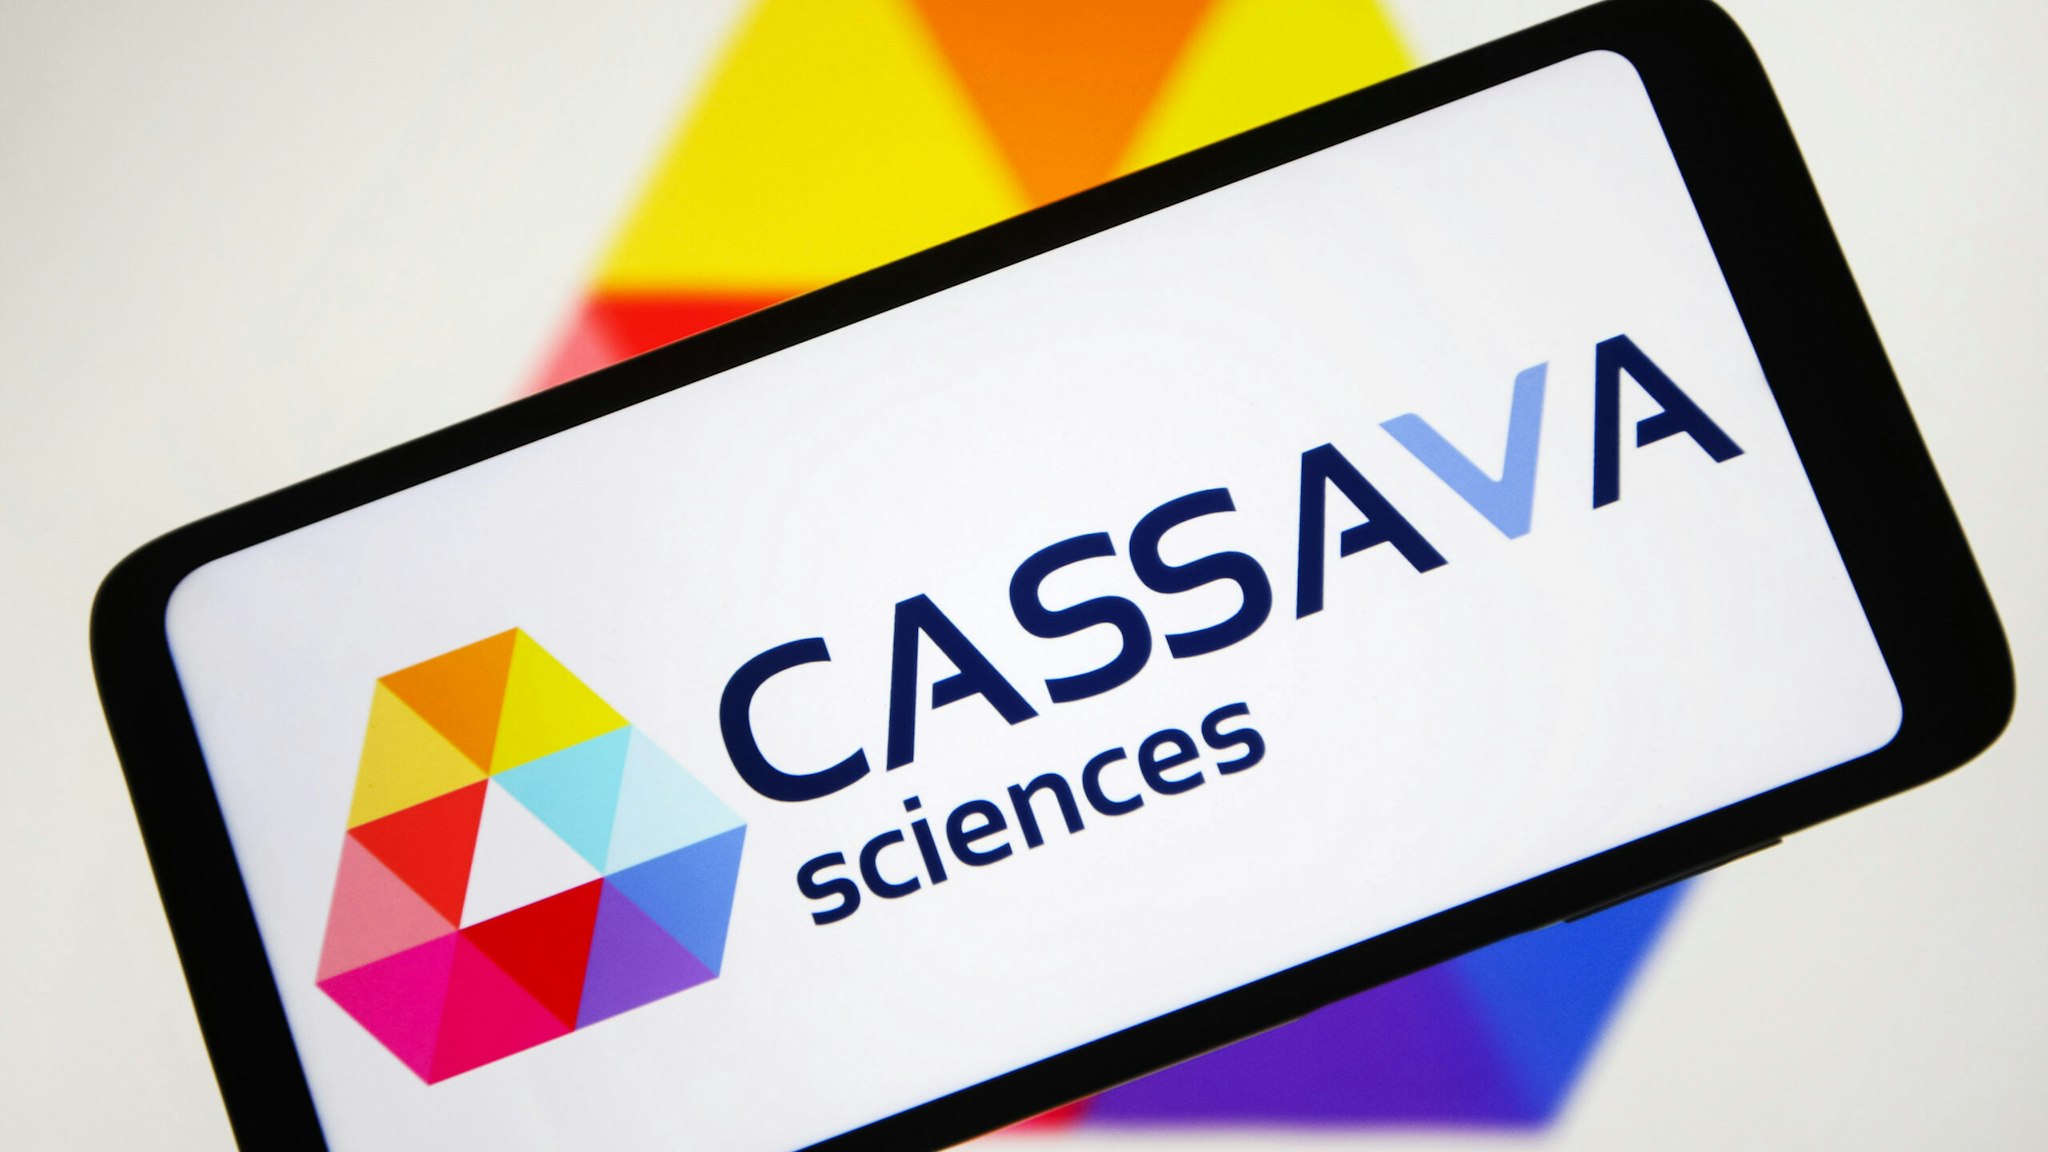 UKRAINE - 2021/10/31: In this photo illustration a Cassava Sciences, Inc. logo is seen on a smartphone screen.